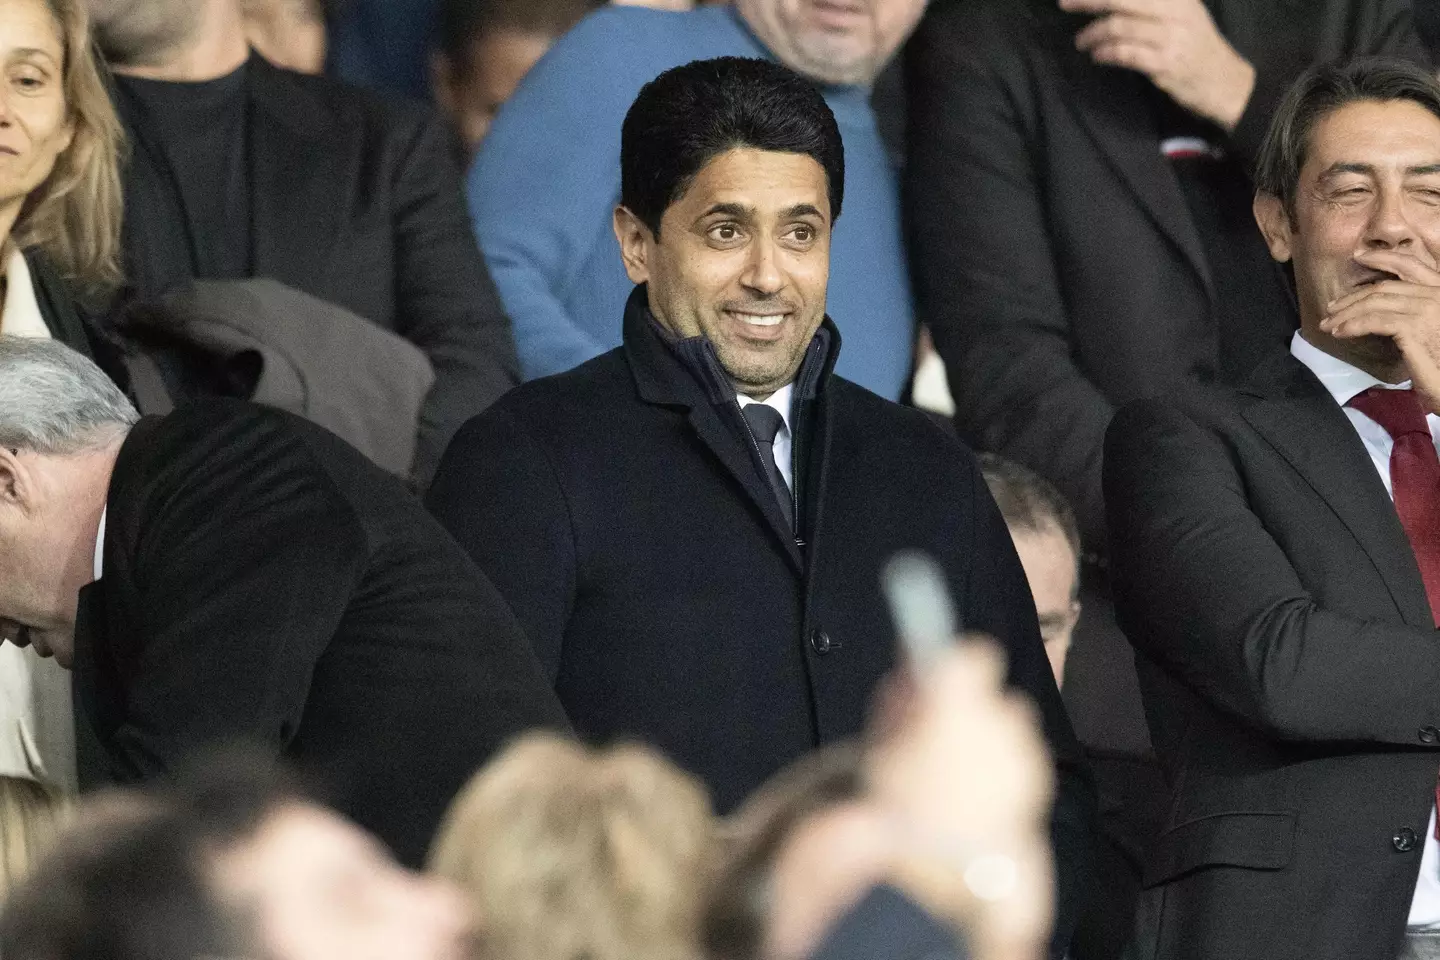 PSG president Nasser Al-Khelaifi is unlikely to be part of any move to buy United. Image: Alamy